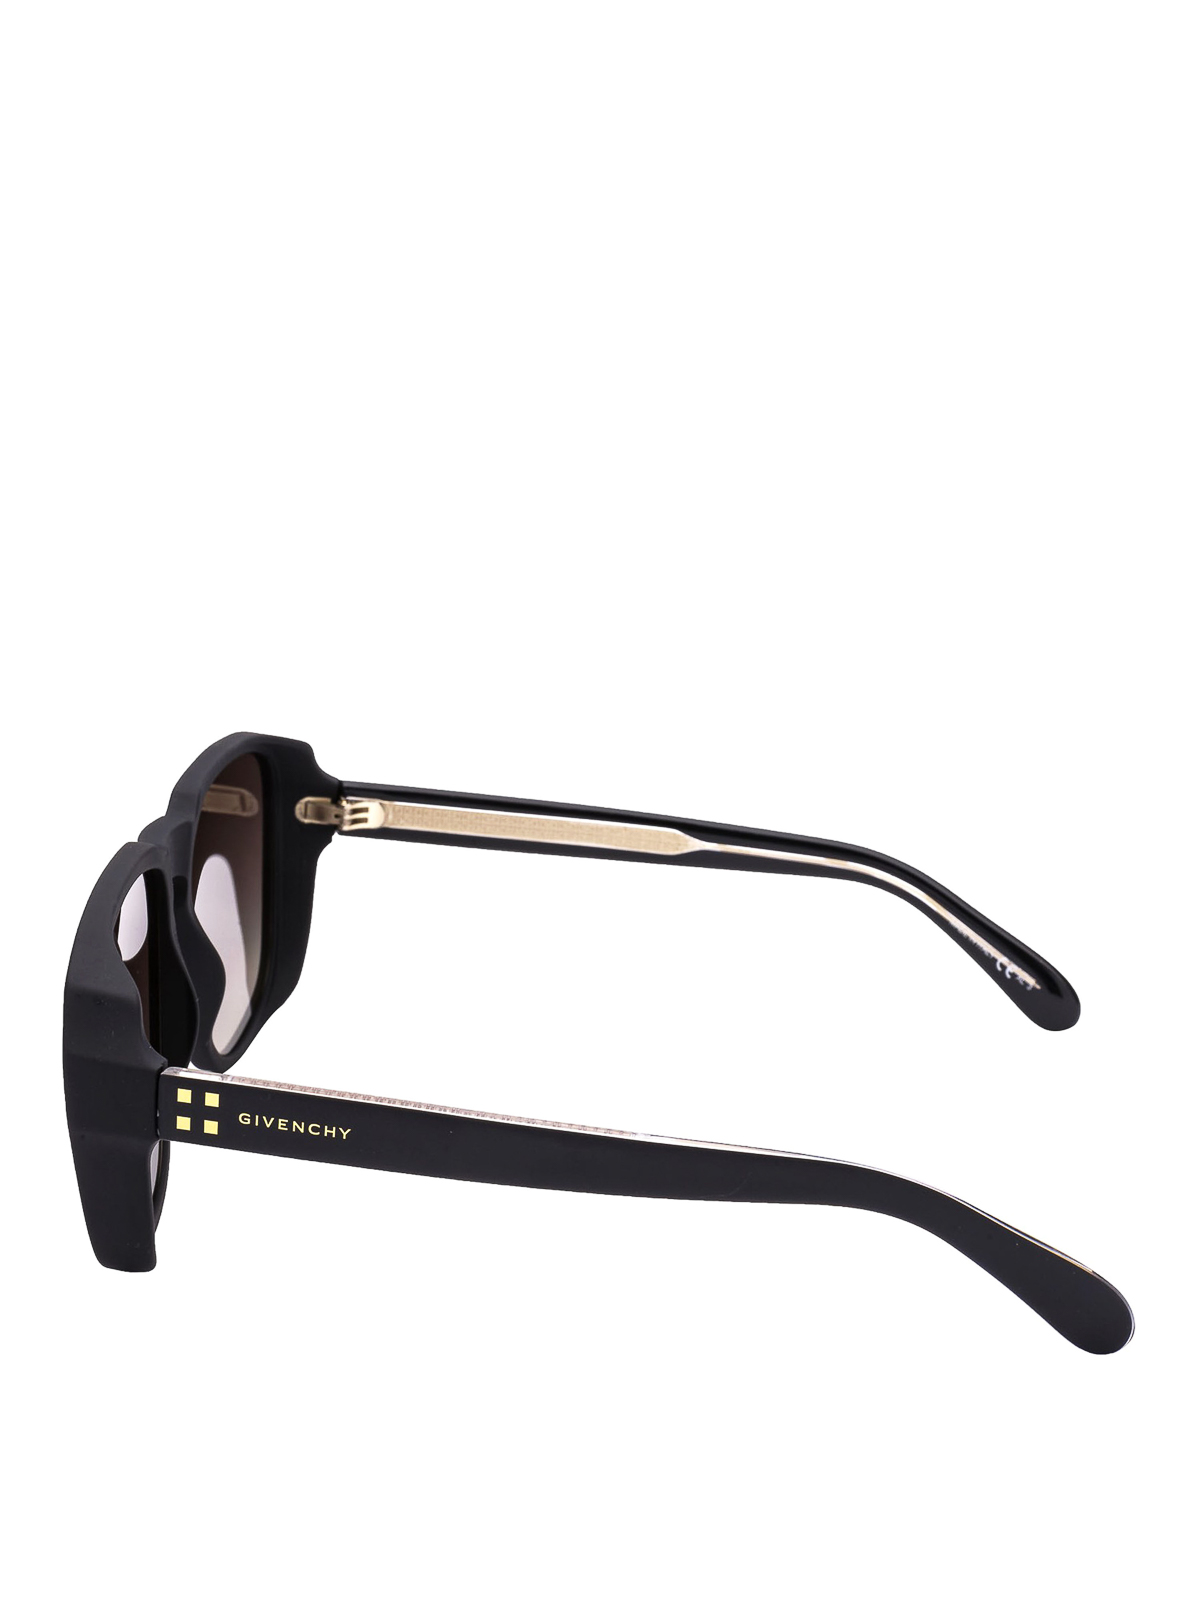 givenchy black and white sunglasses